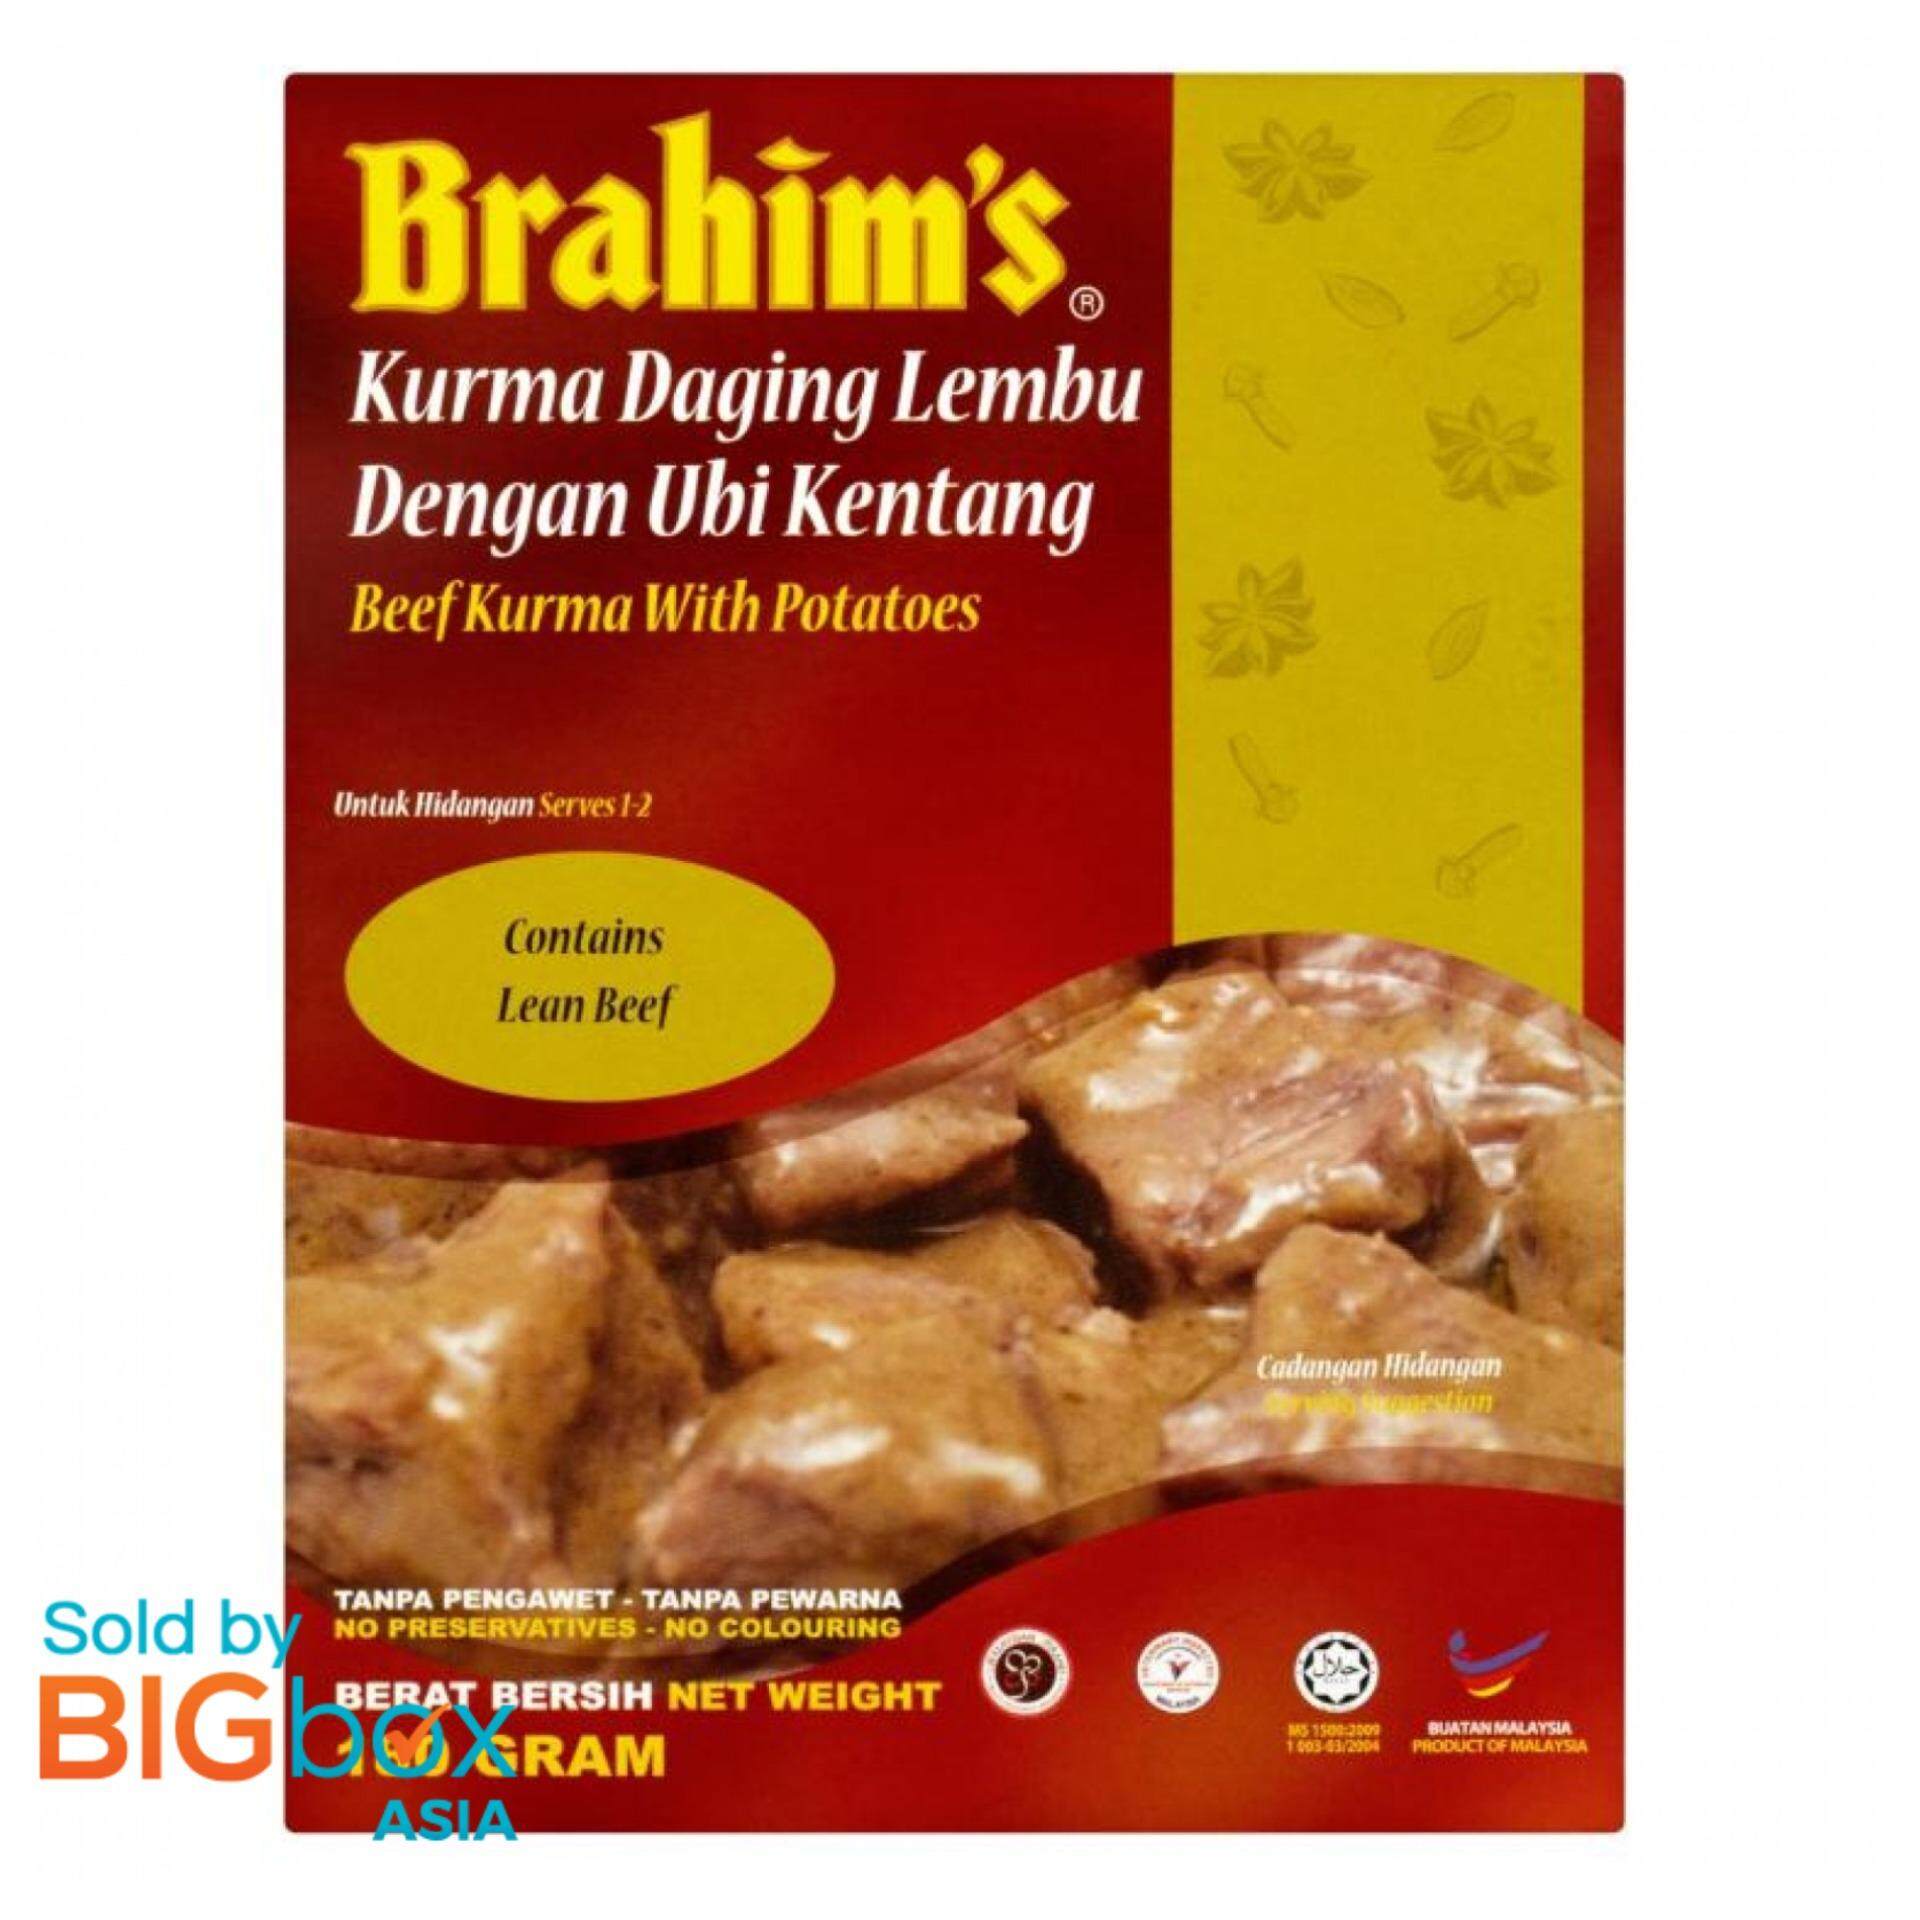 Brahim's Ready To Eat Meals 180g - Beef Curry with Potatoes